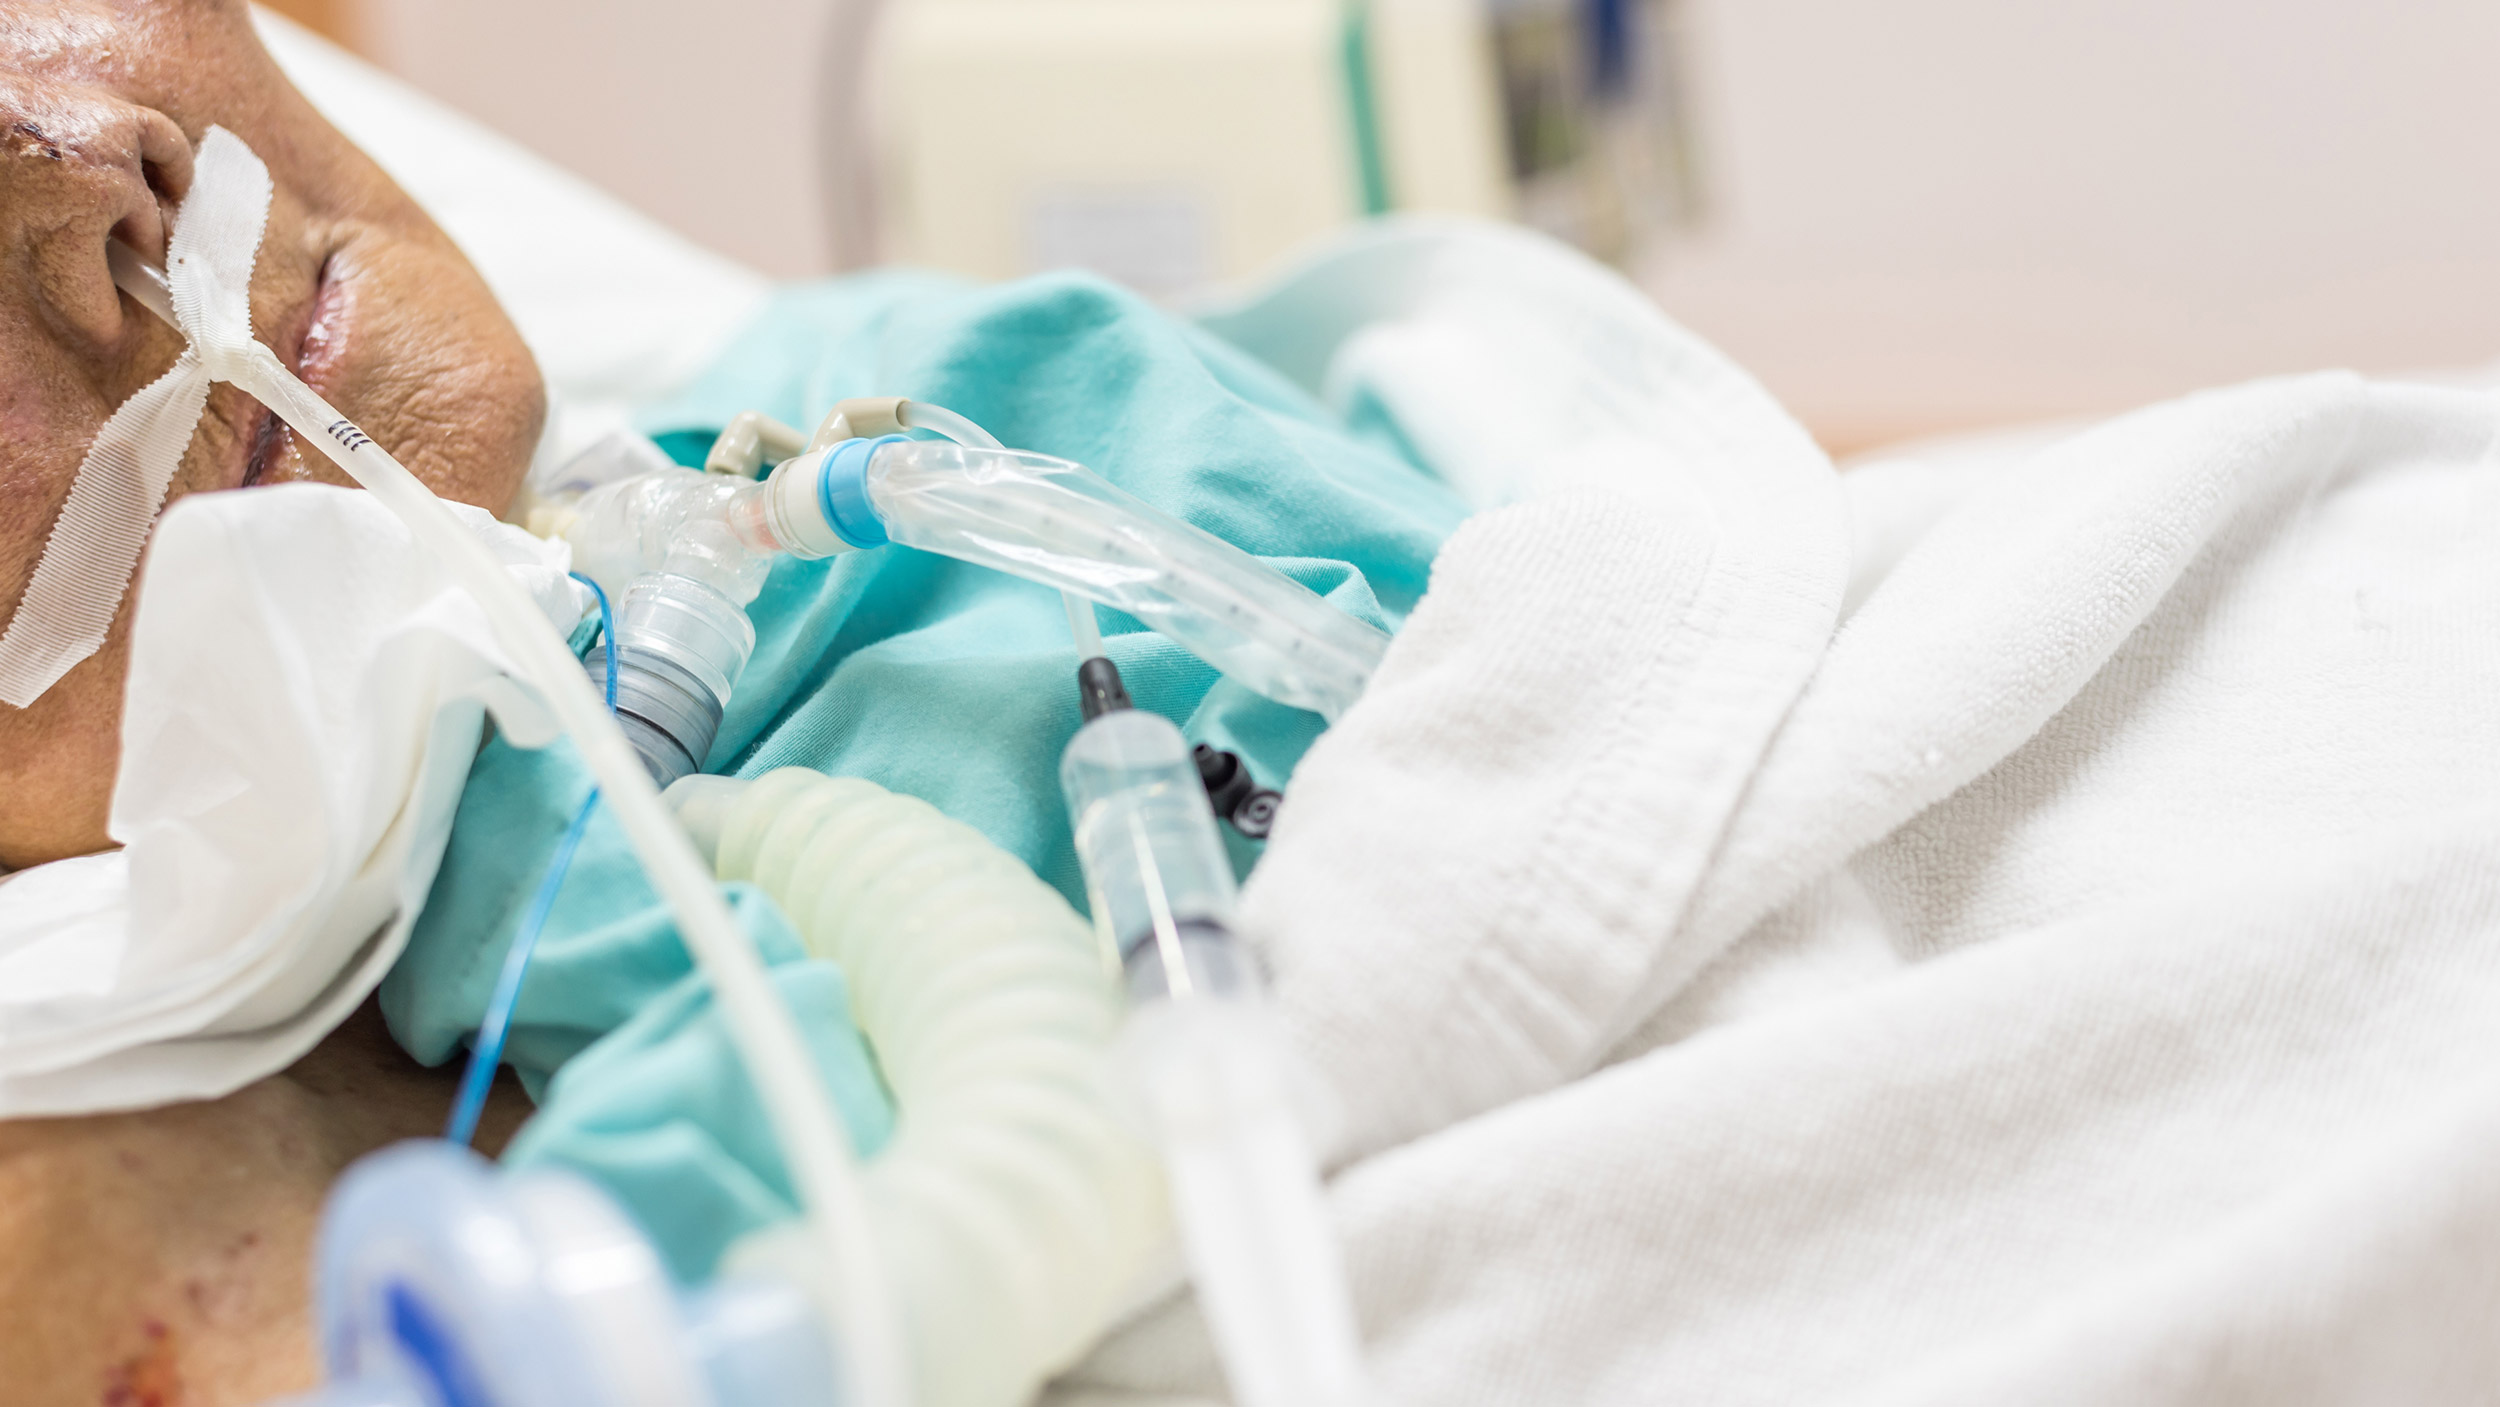 Can Combining Pulmonary and GI Procedures Shorten Hospital Stays?